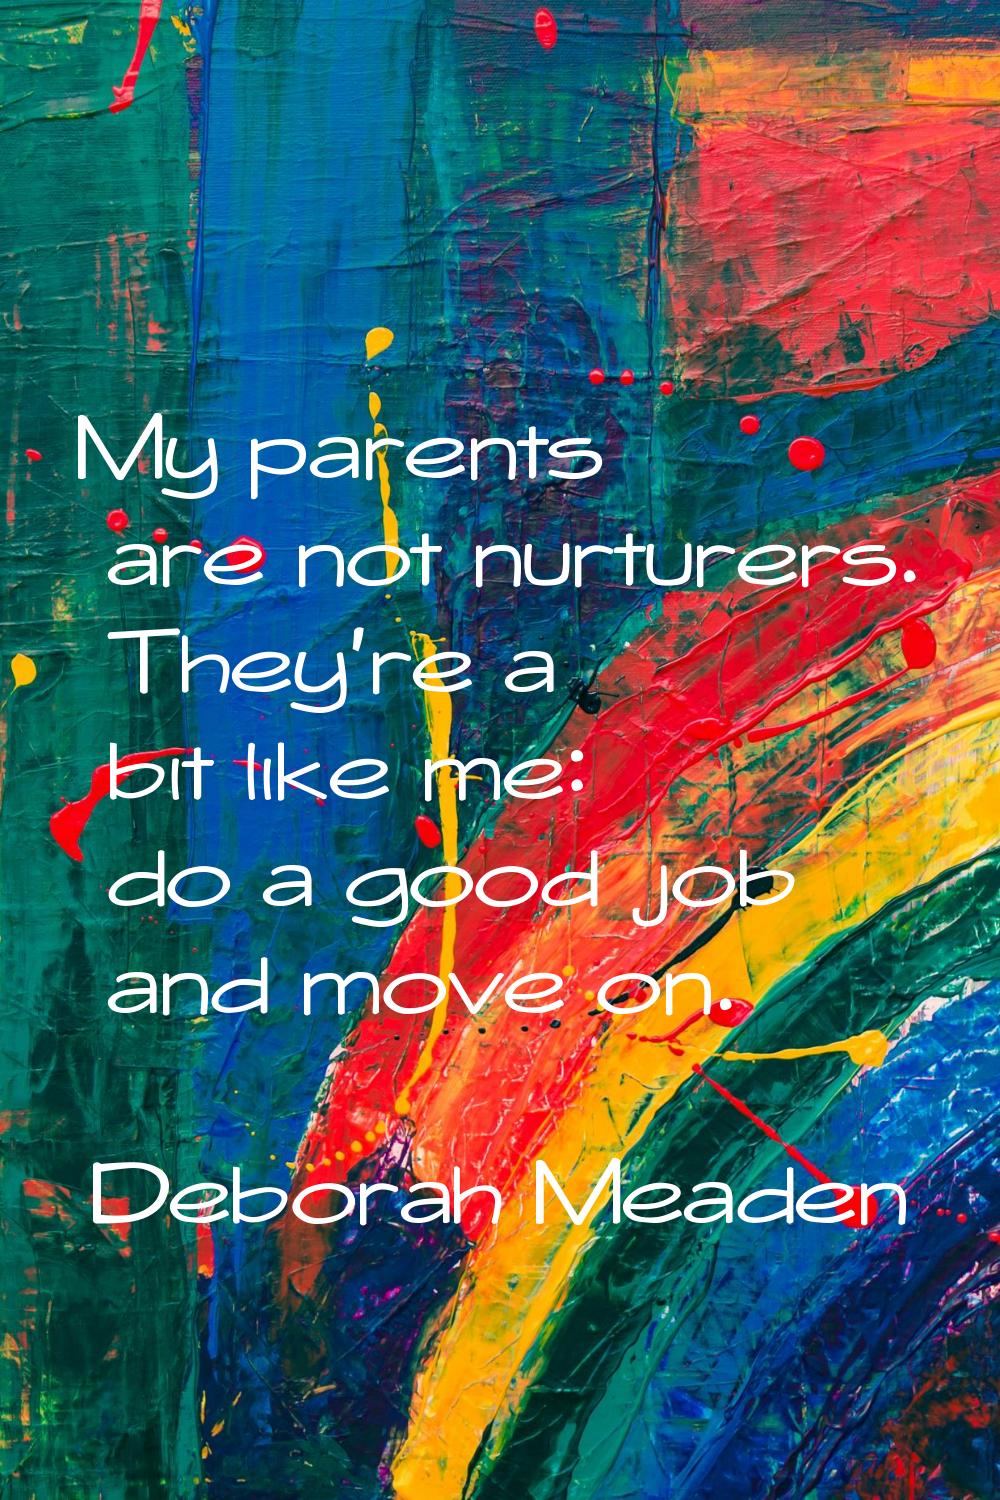 My parents are not nurturers. They're a bit like me: do a good job and move on.